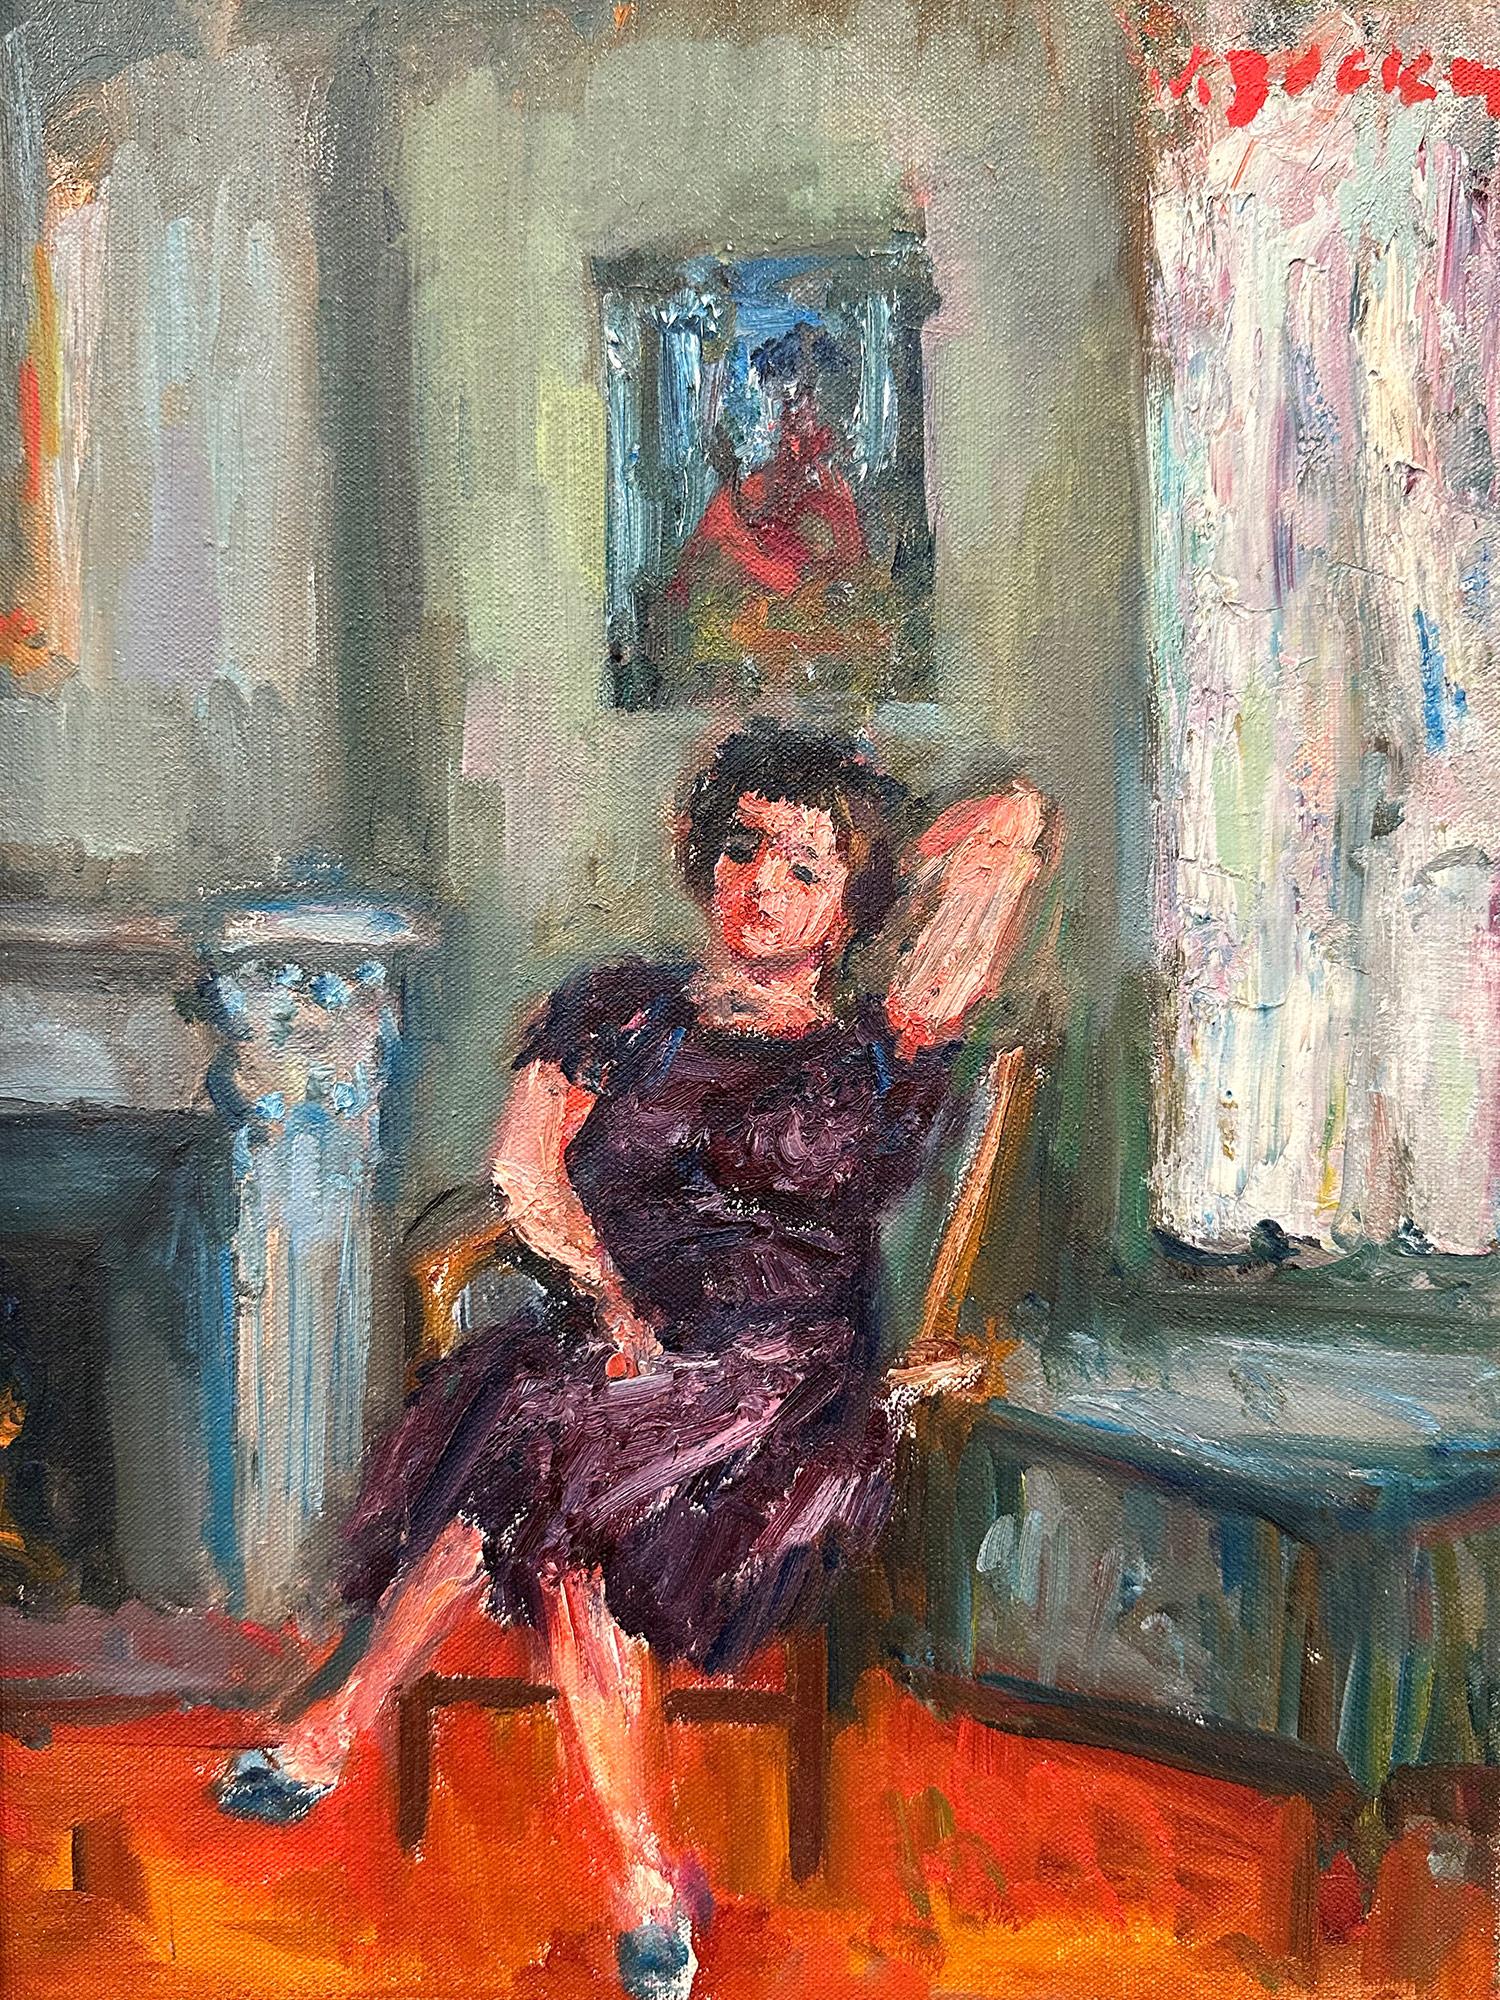 A charming oil painting depicting an interior scene of an elegant woman crossing her legs, reclining on a chair.  She exudes a calmness while we can feel the breeze coming through the curtains of the window. The fireplace and the painting on the